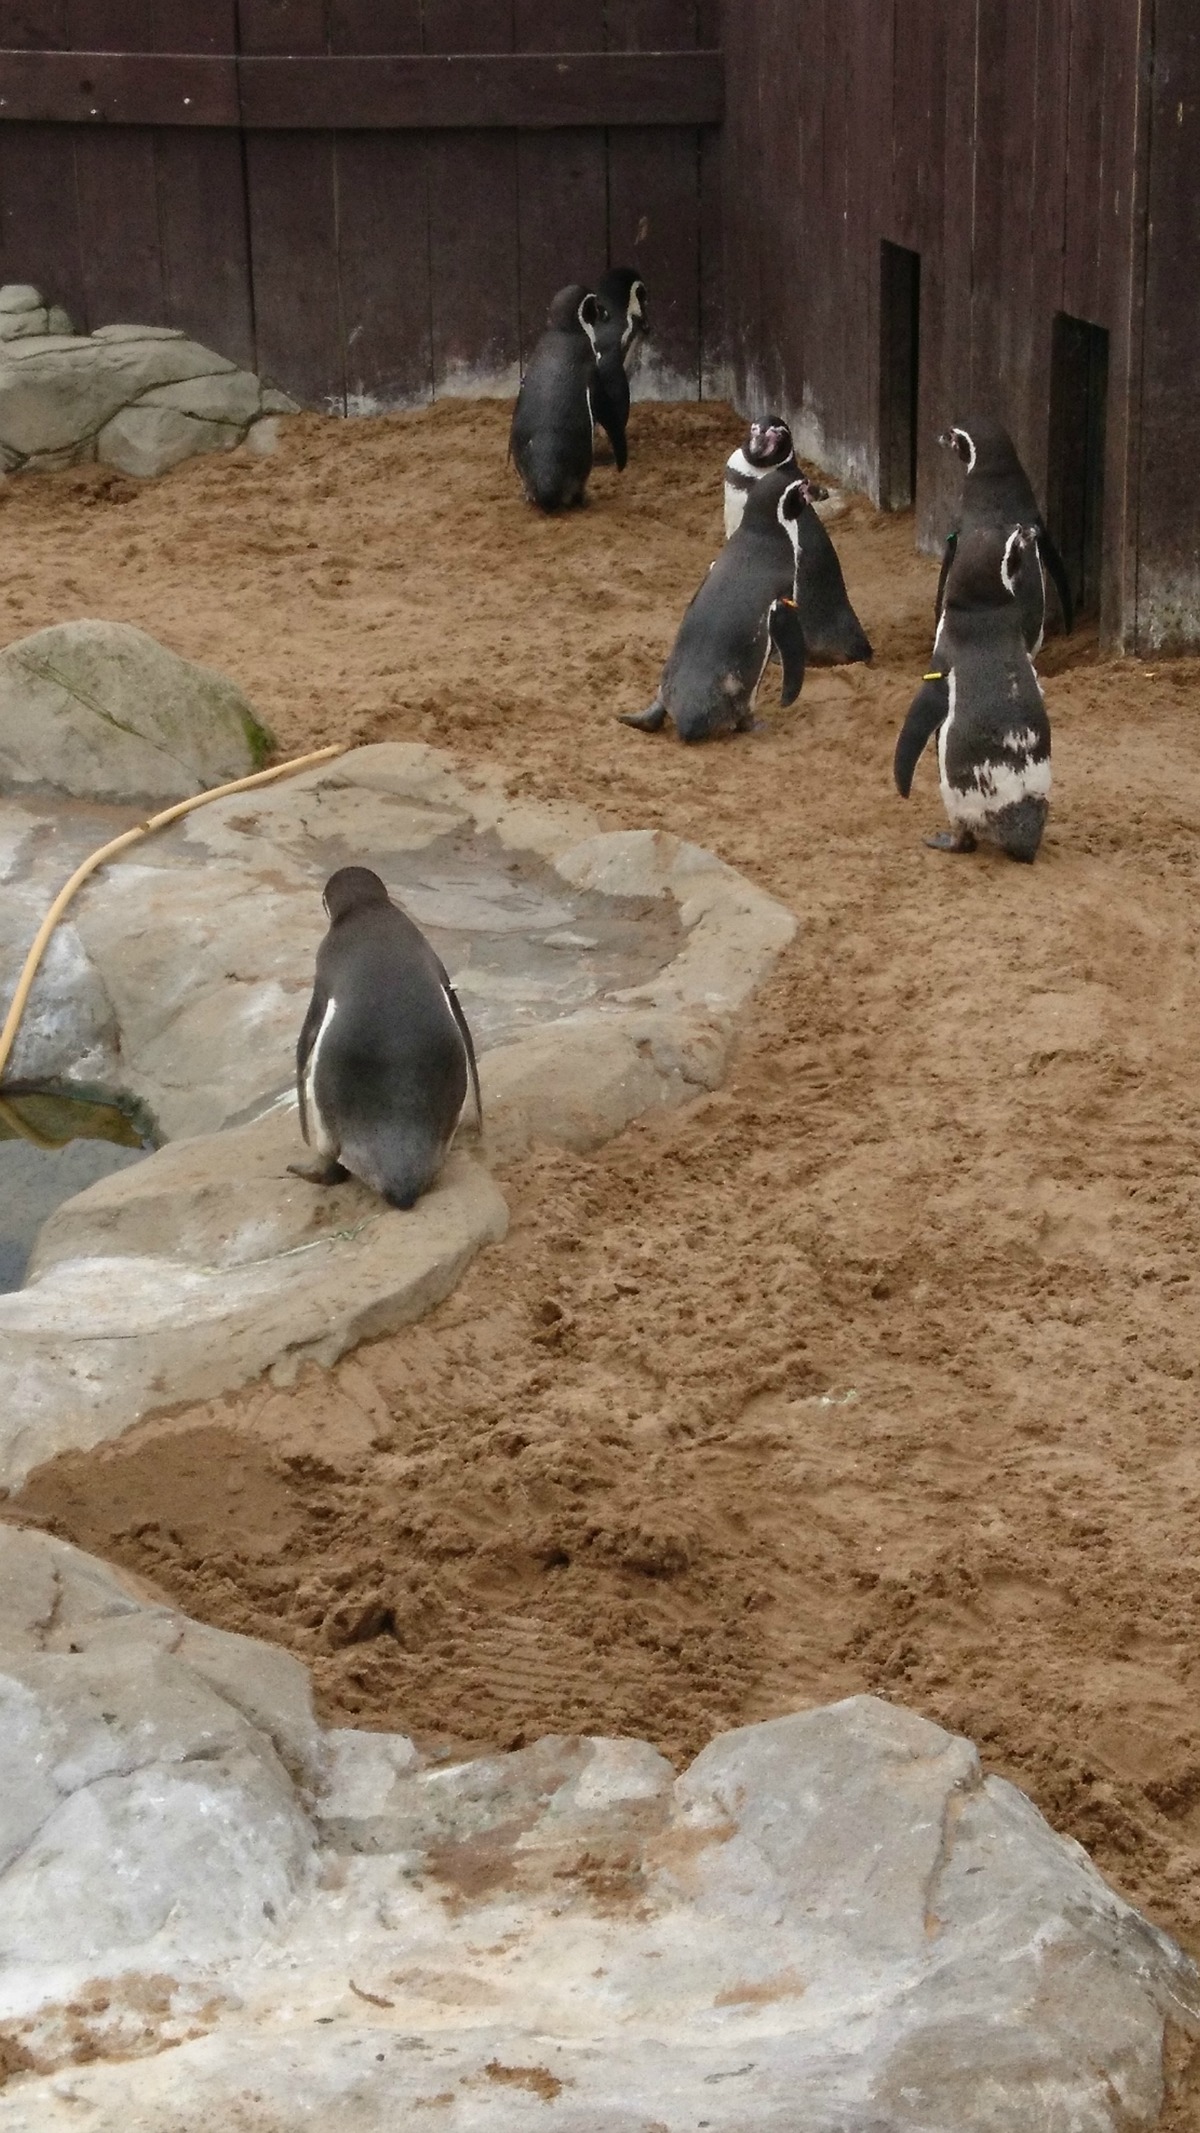 The Penguin enclosure at Scarborough Sealife Centre which we visited while on holiday at Haven Blue Dolphin